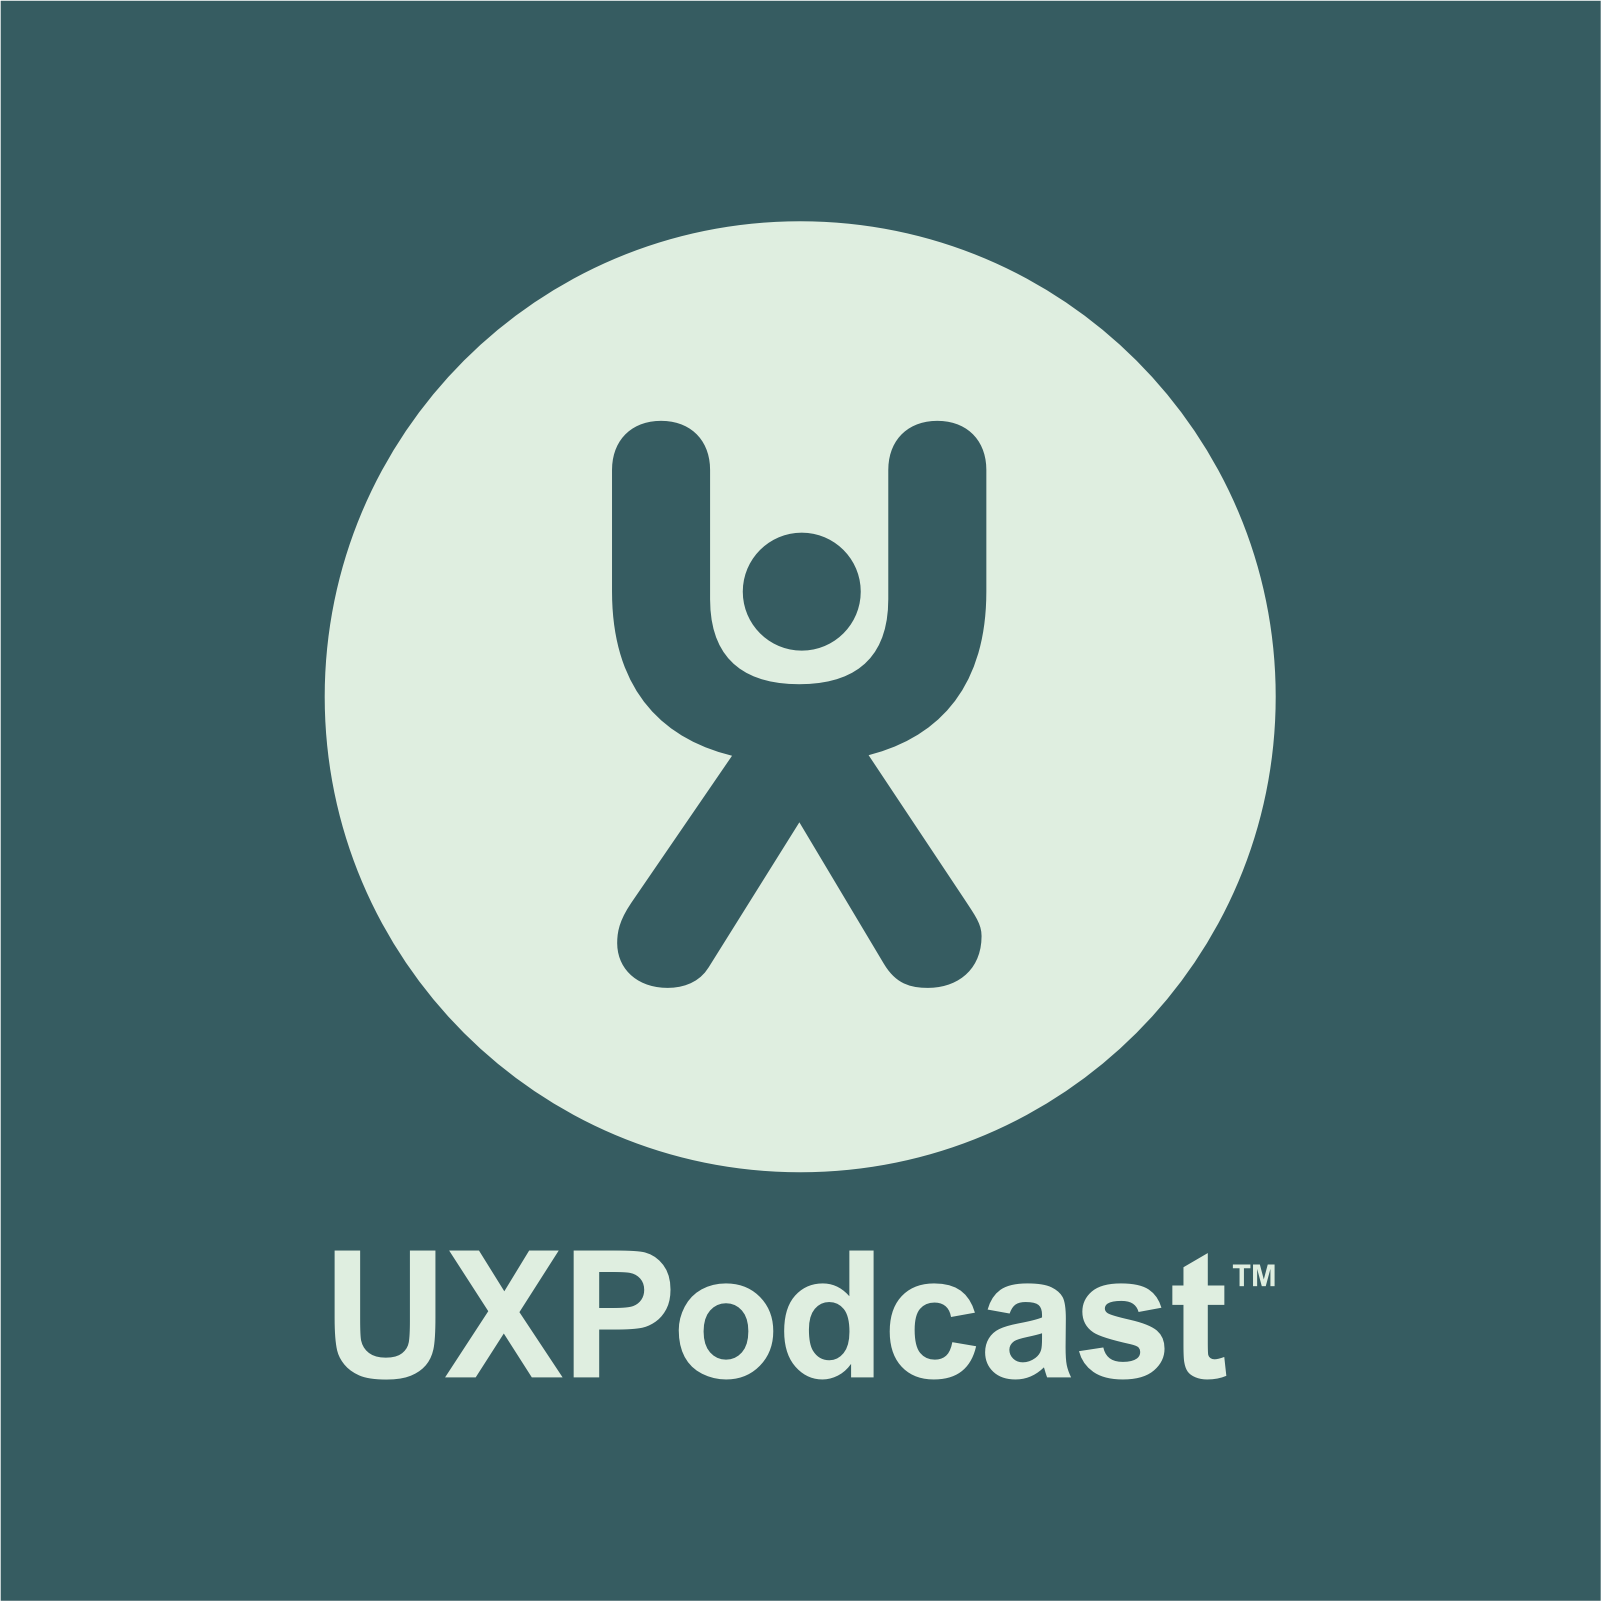 UX Podcast (UX Podcast)